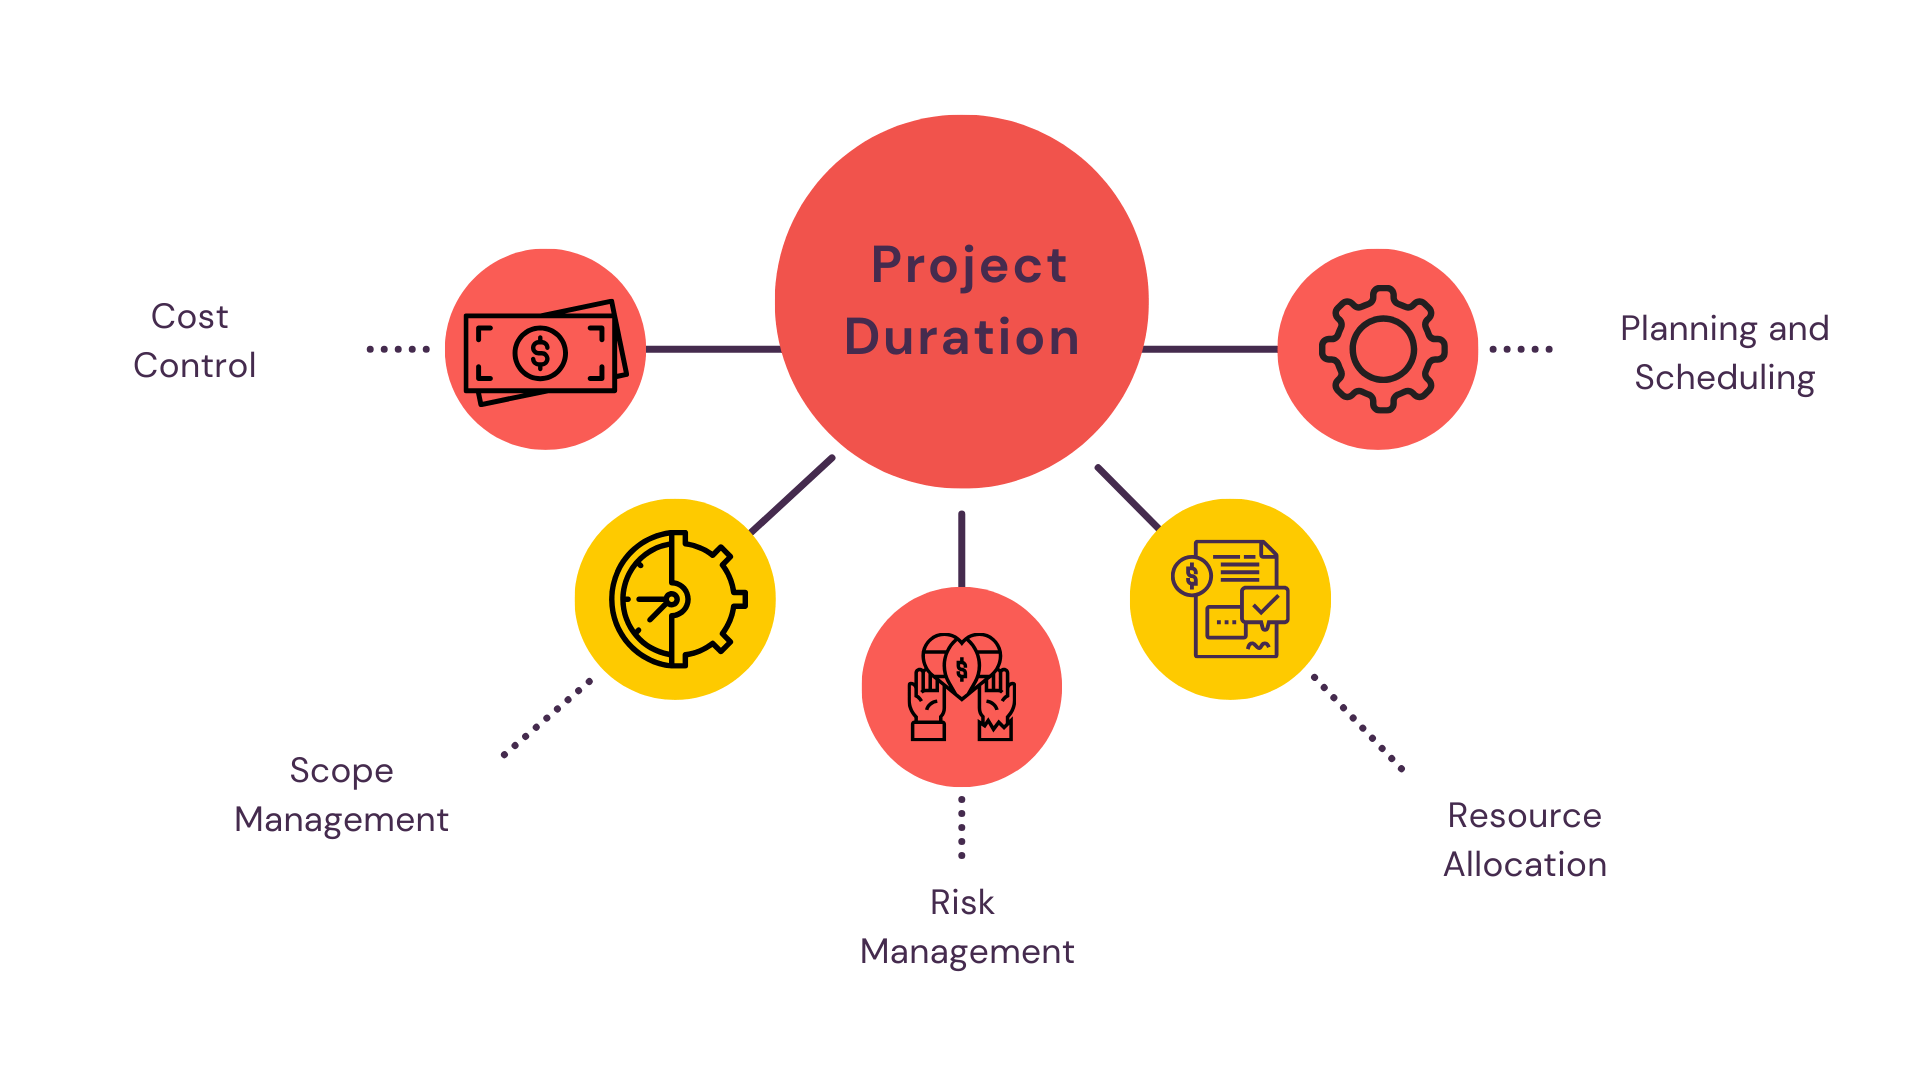 Project Duration